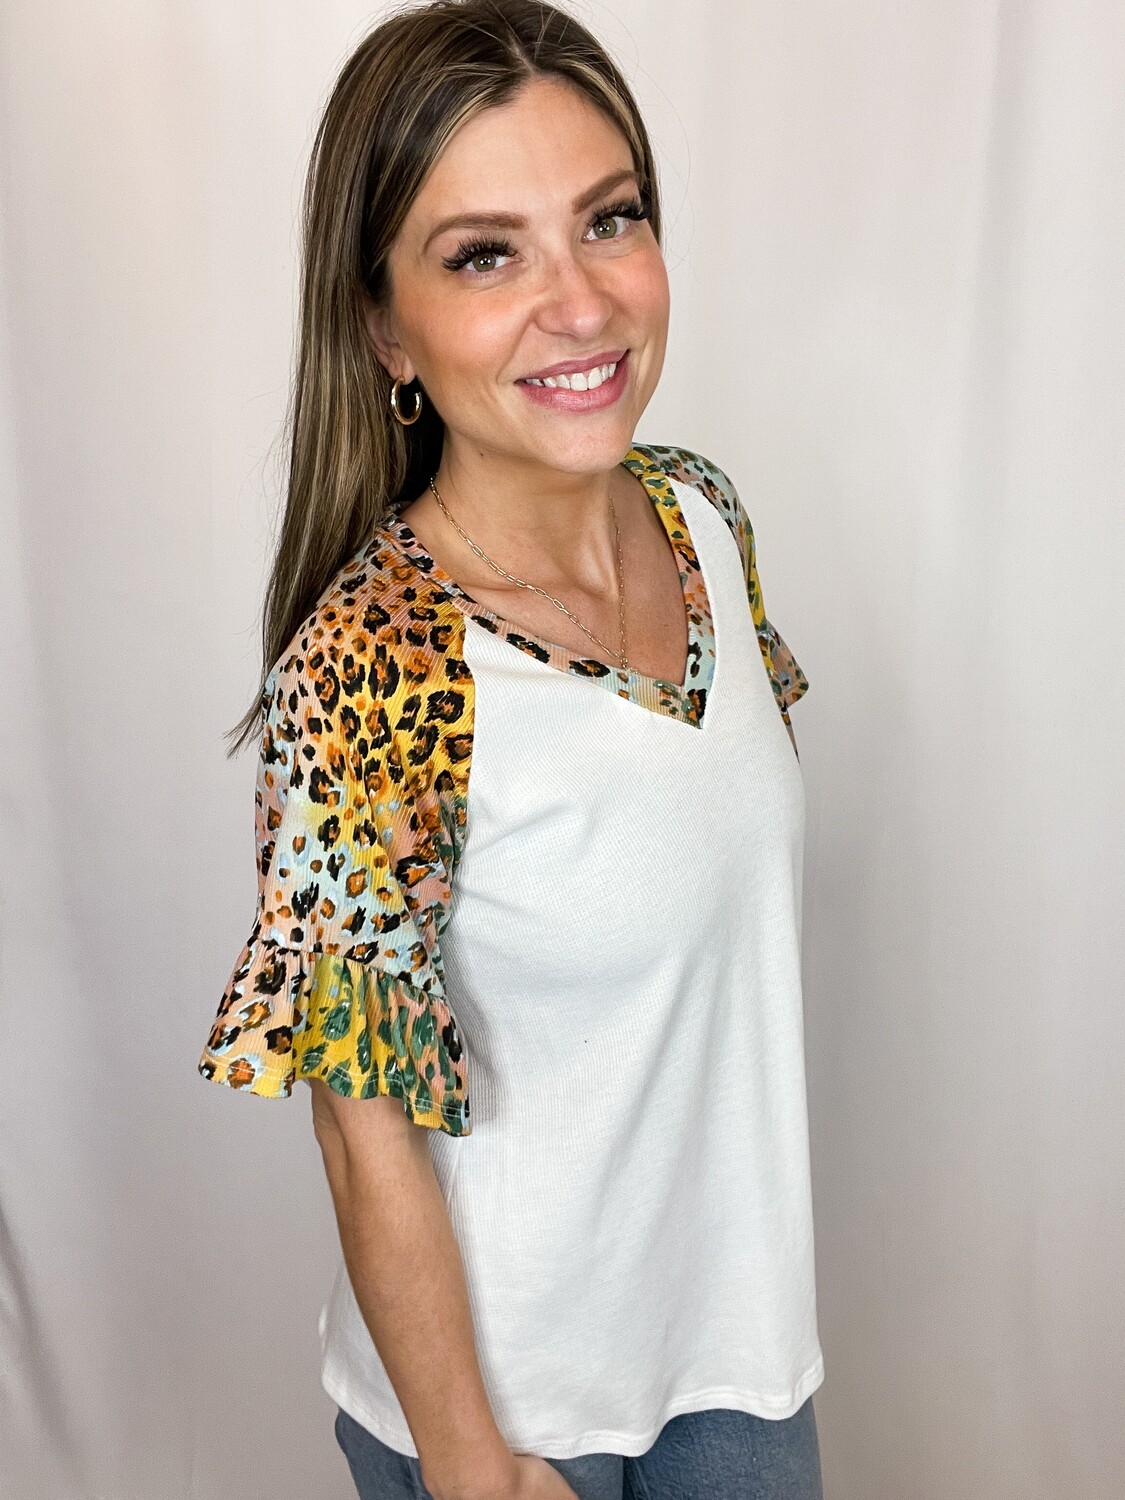 Lovely Melody White Top with Leopard Patterned Sleeves - S